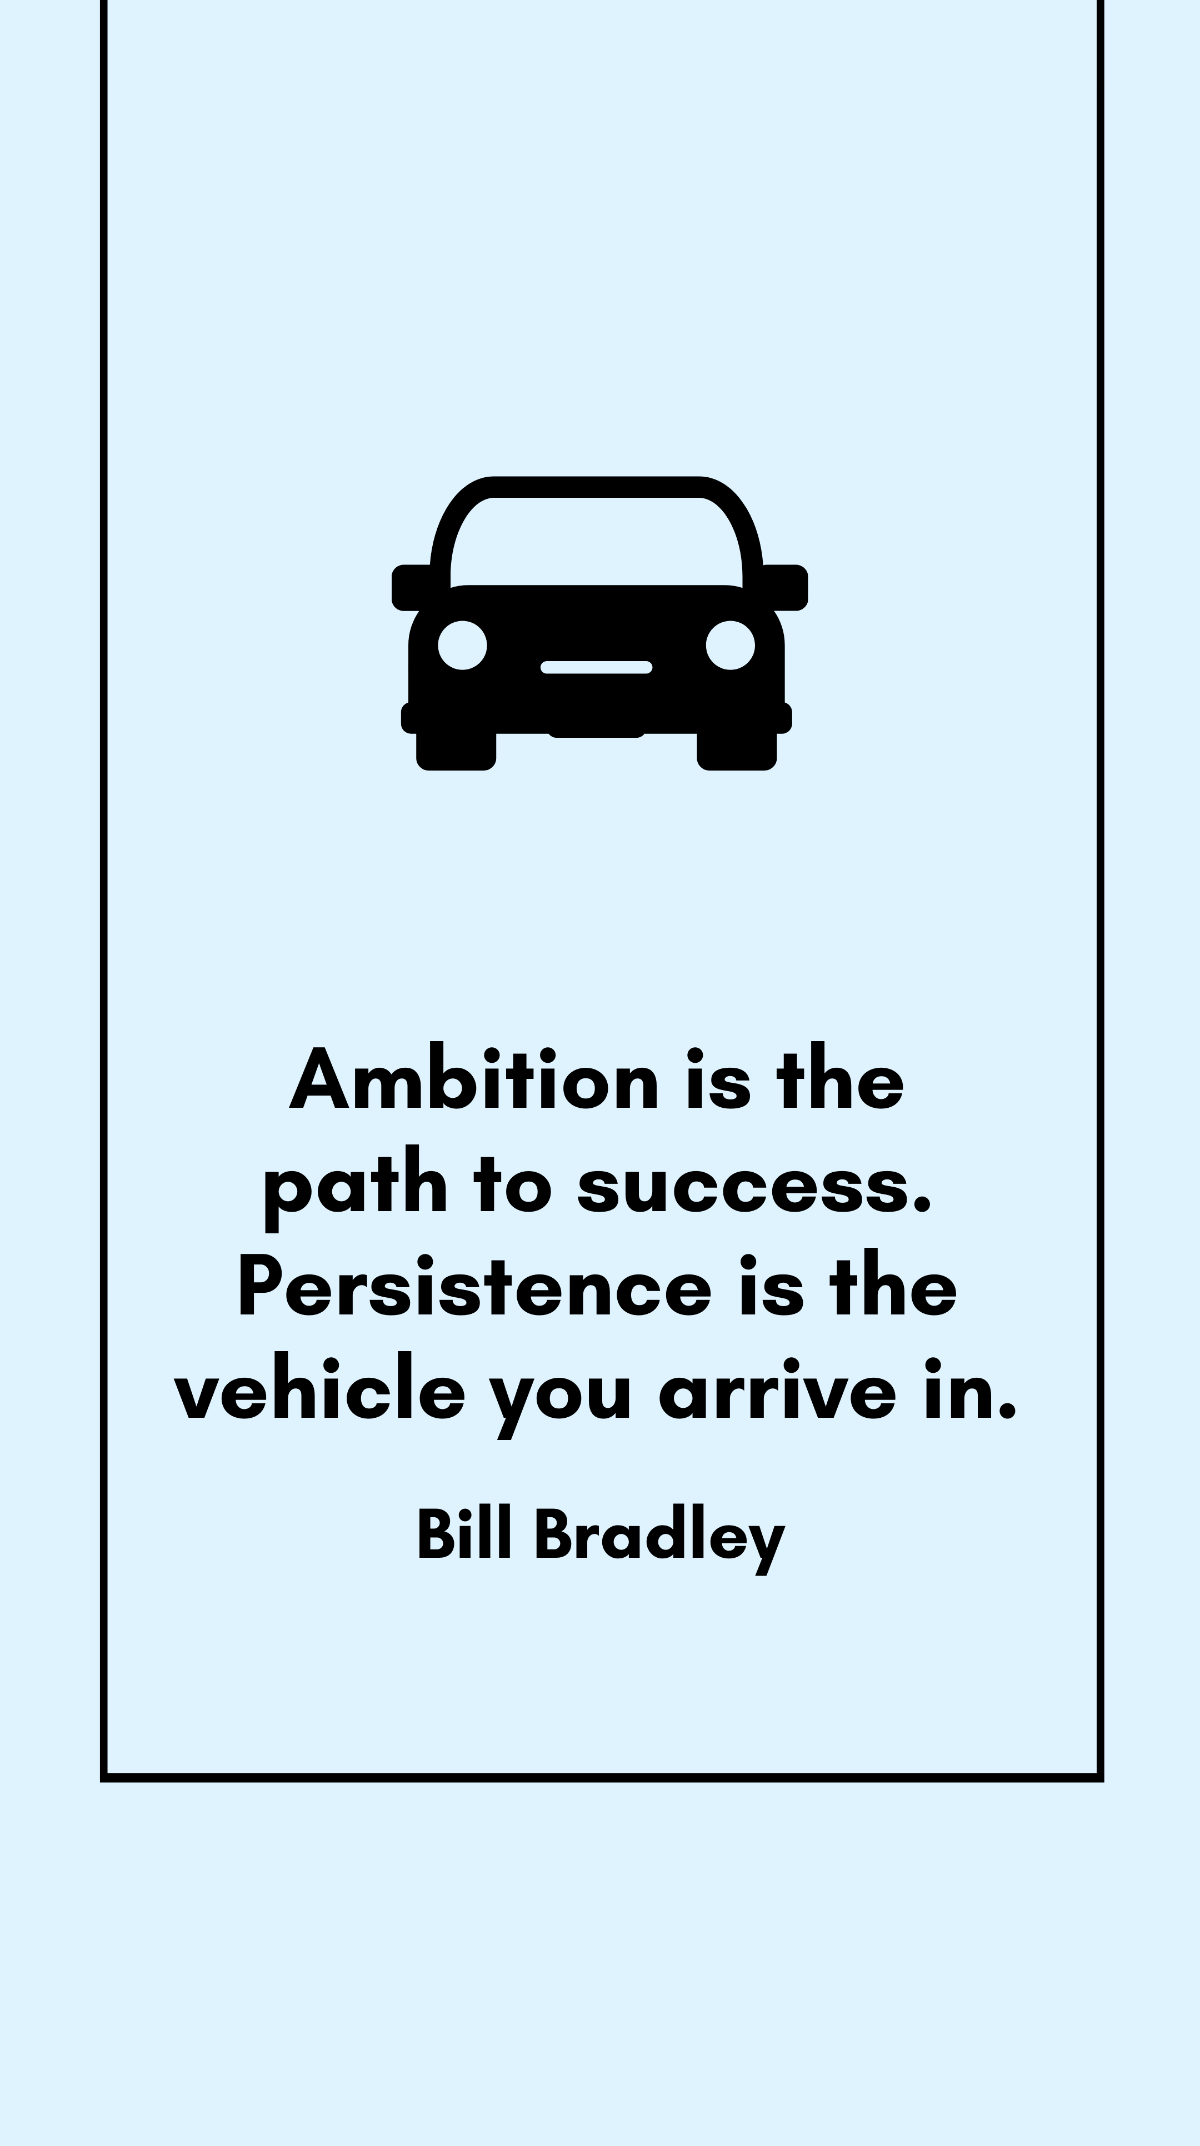 Bill Bradley - Ambition is the path to success. Persistence is the vehicle you arrive in. Template